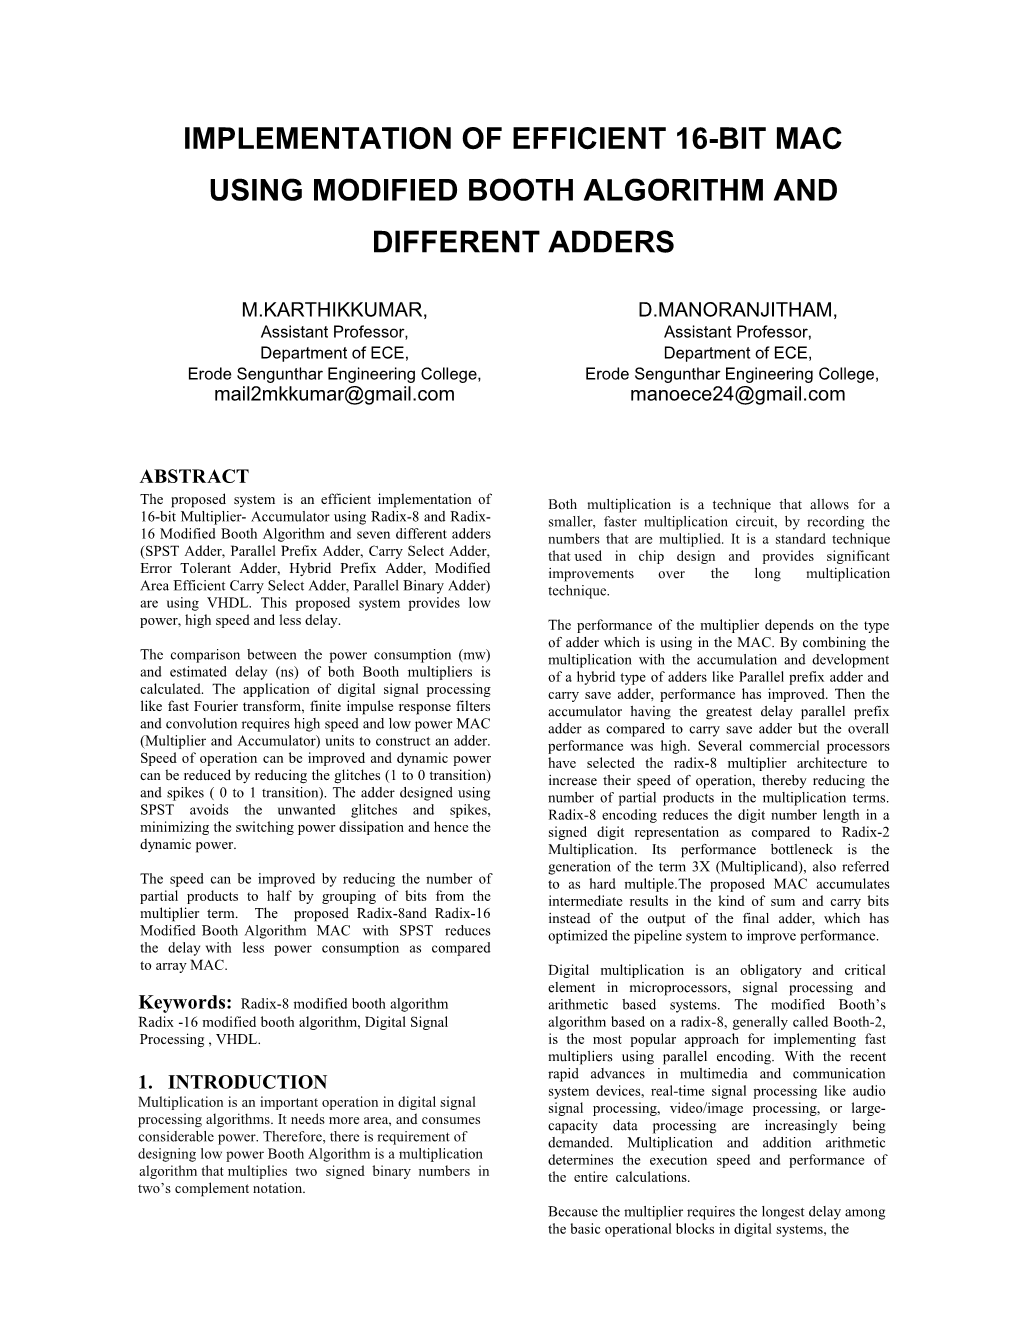 Implementation of Efficient 16-Bit Mac Using Modified Booth Algorithm and Different Adders